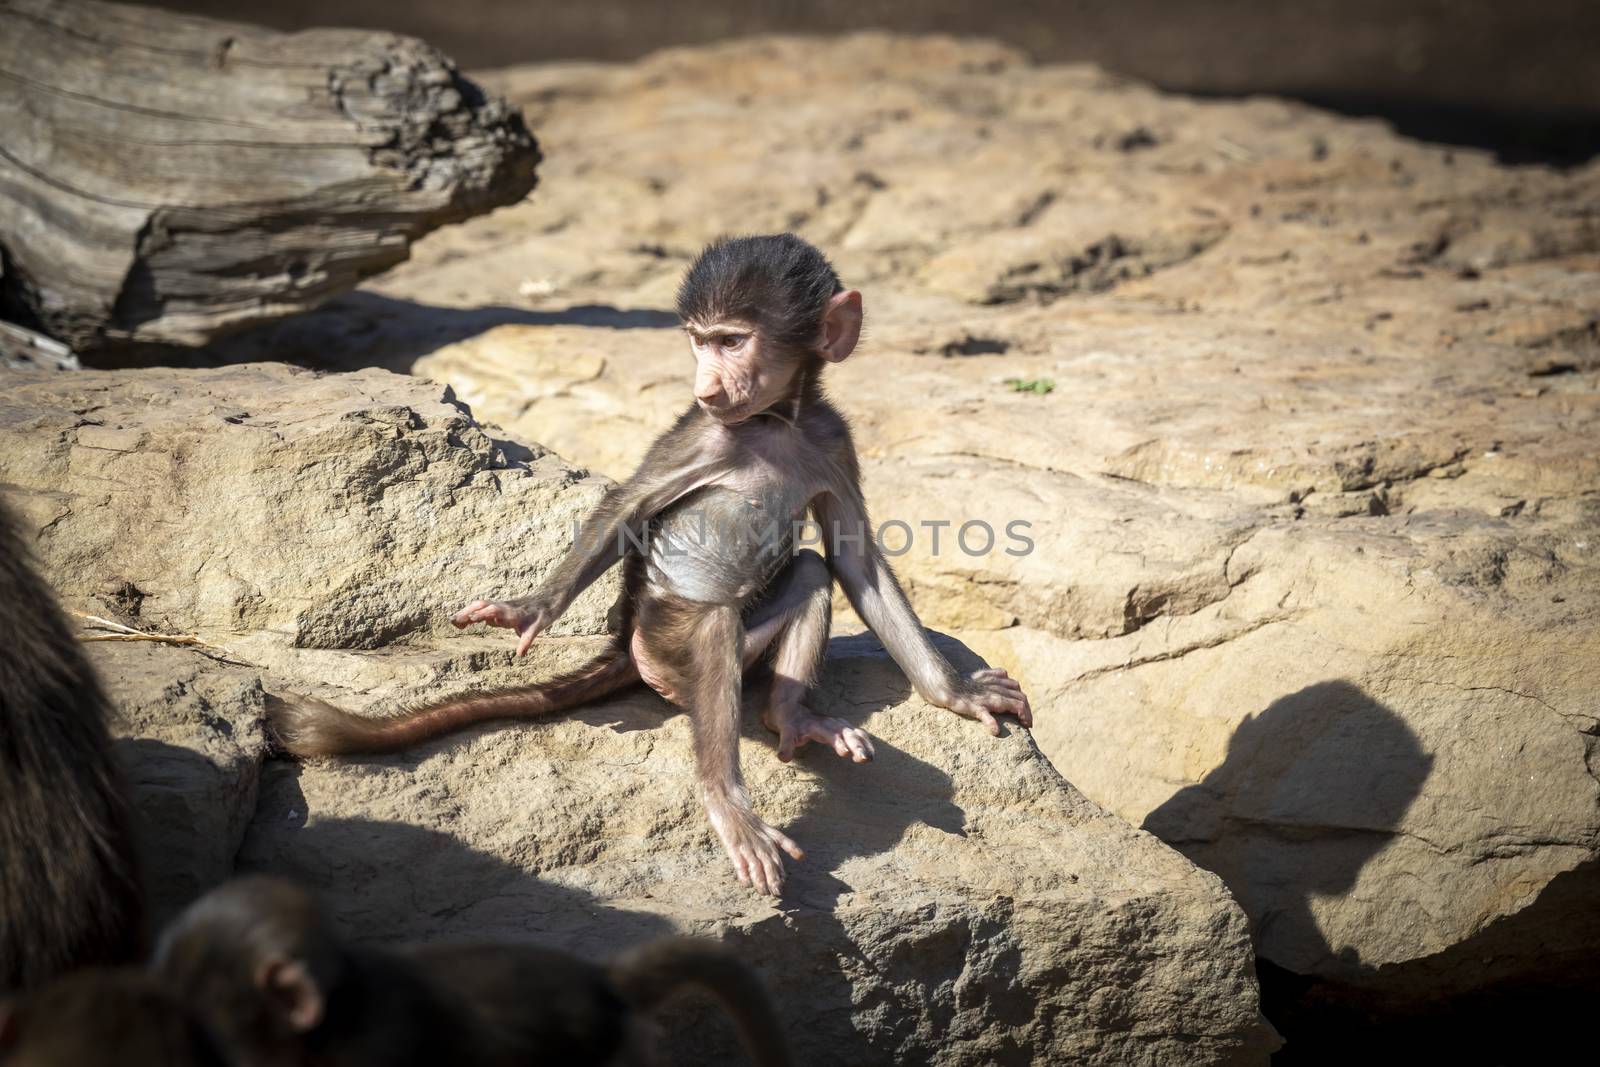 A baby Hamadryas Baboon sitting on a rock in the sunshine